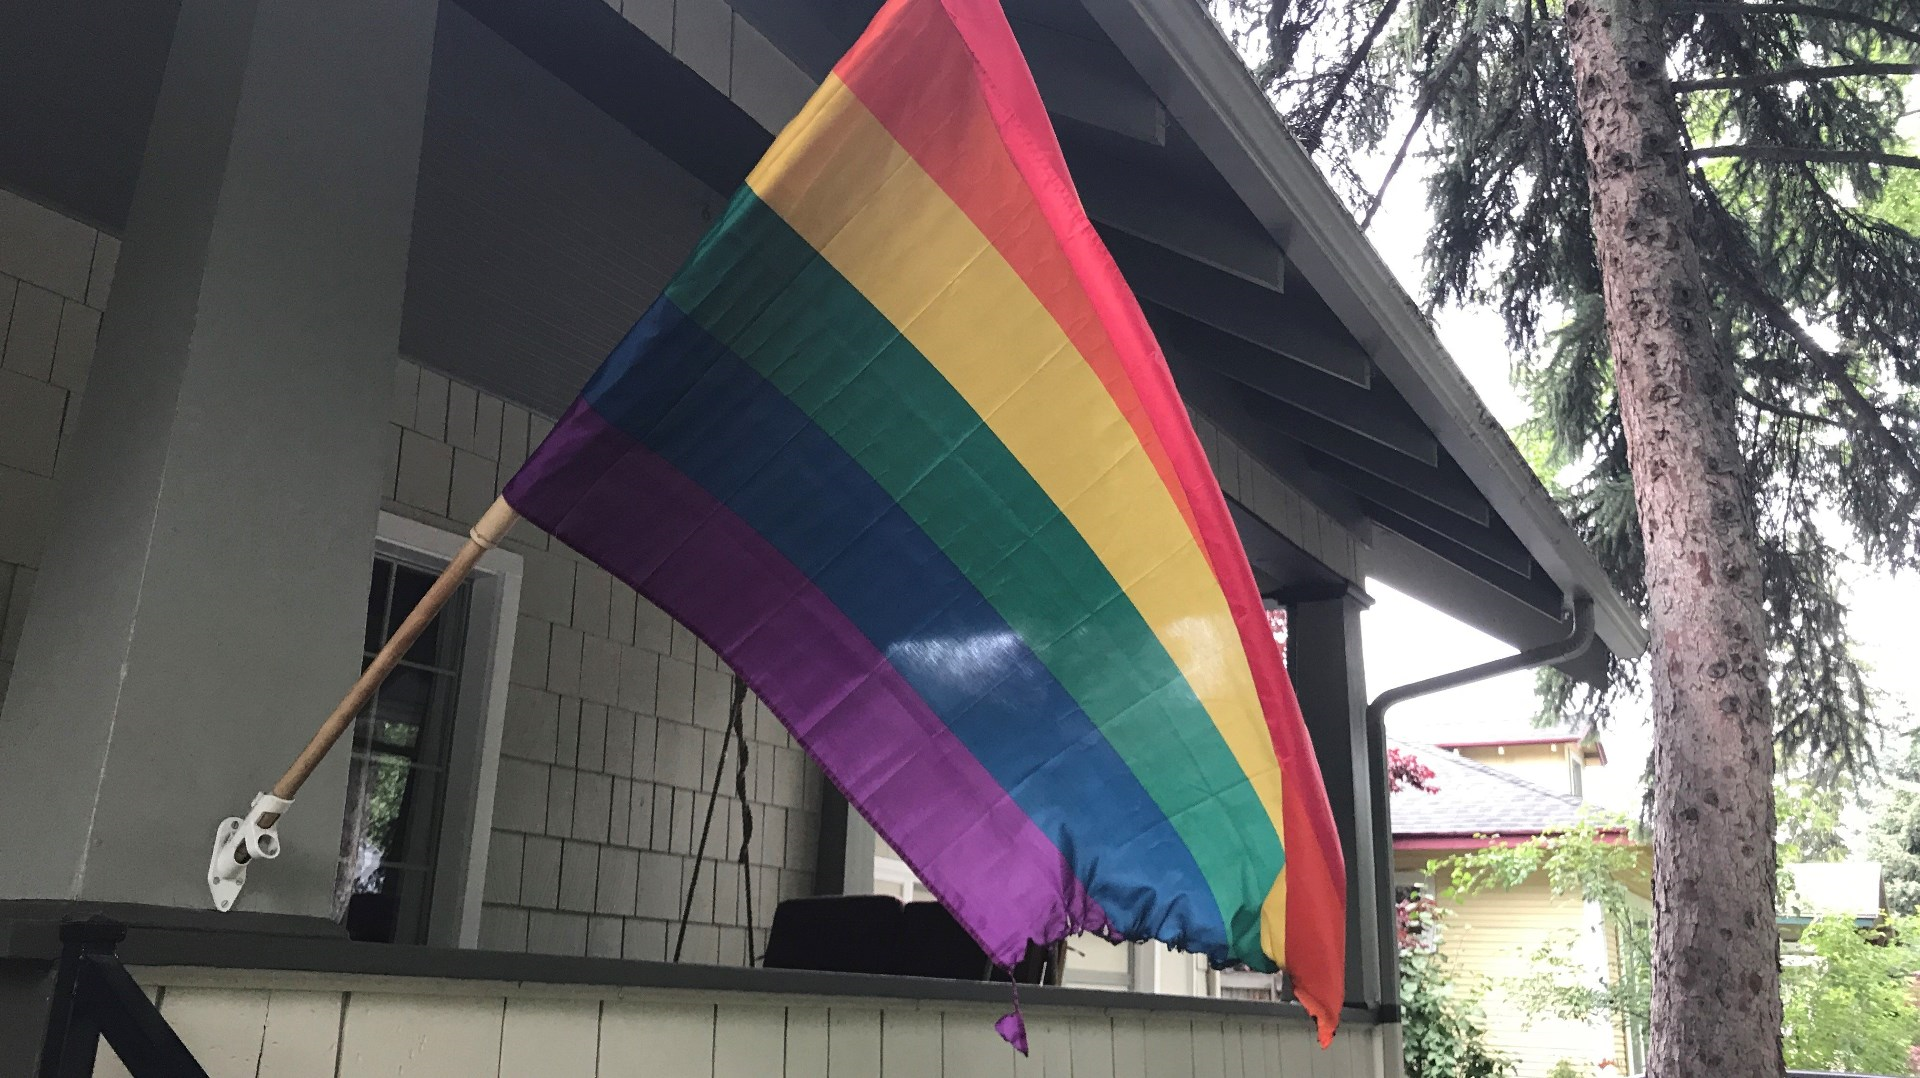 Man get years for burning gay flag